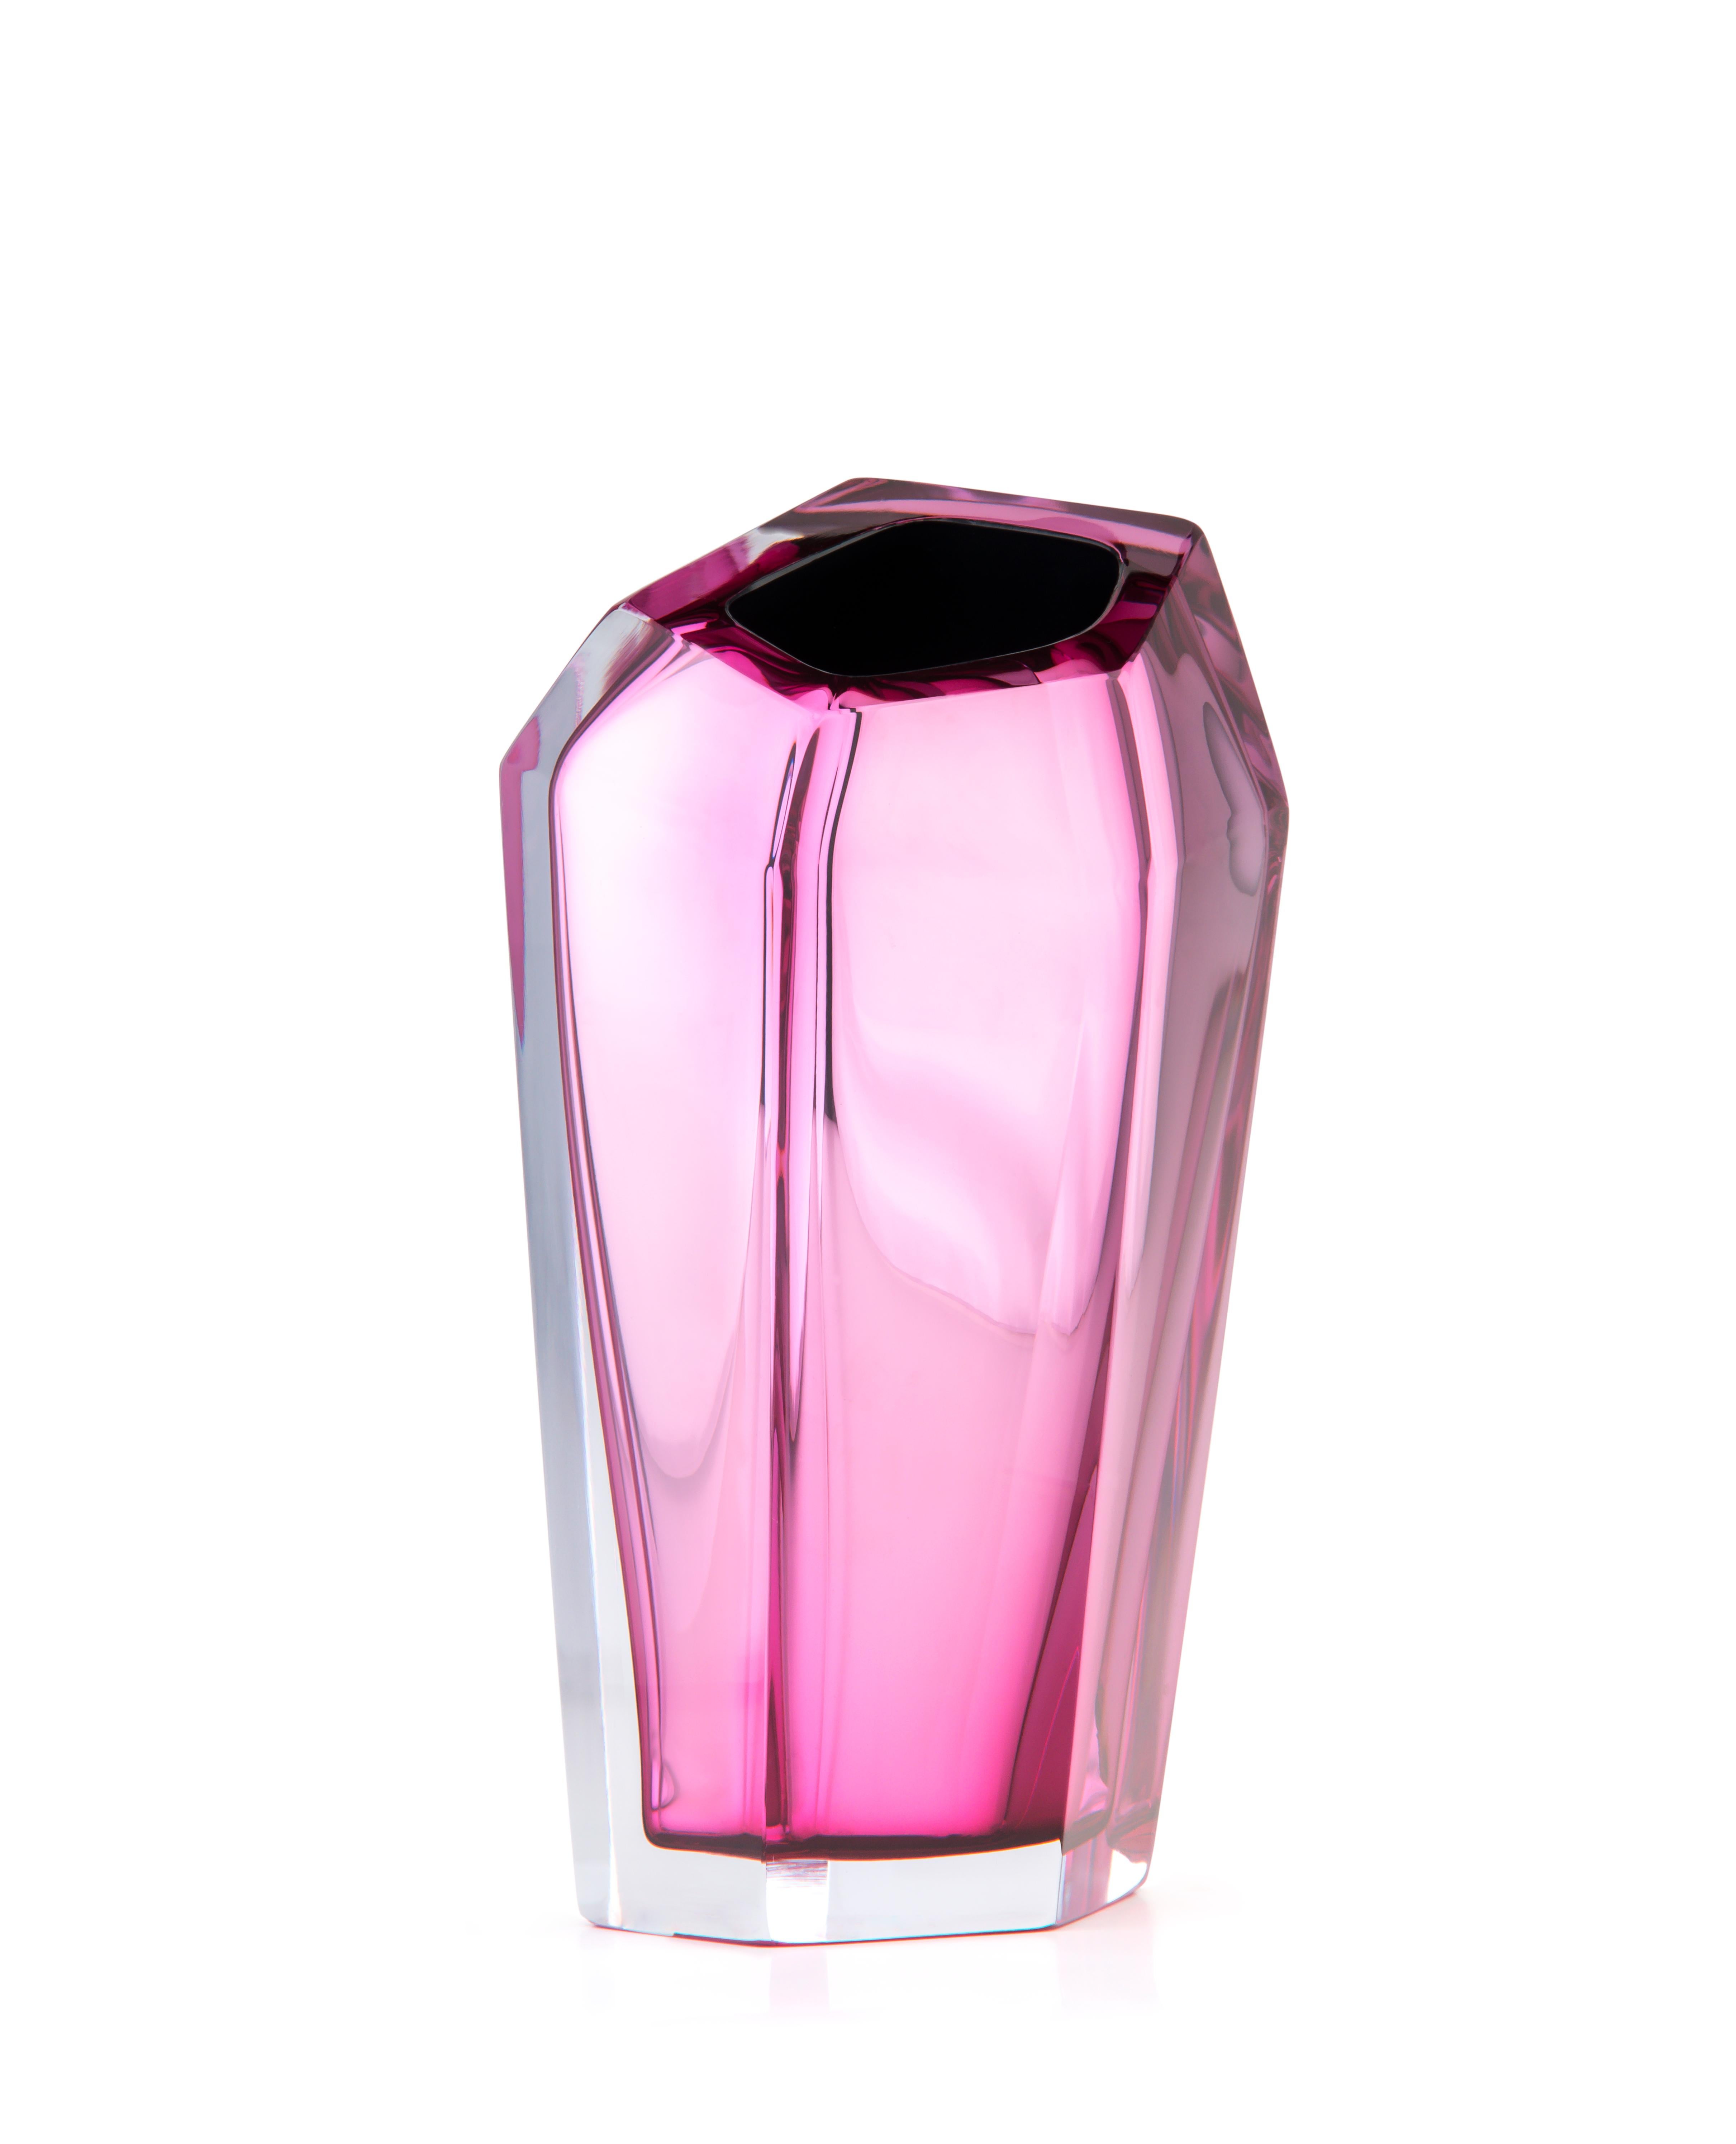 Kastle pink small vase by Purho
Dimensions: D20 x H35 cm
Materials: Glass
Other colours and dimensions are available. 

Purho is a new protagonist of made in Italy design, a work of synthesis, a research that has lasted for years, an Italian